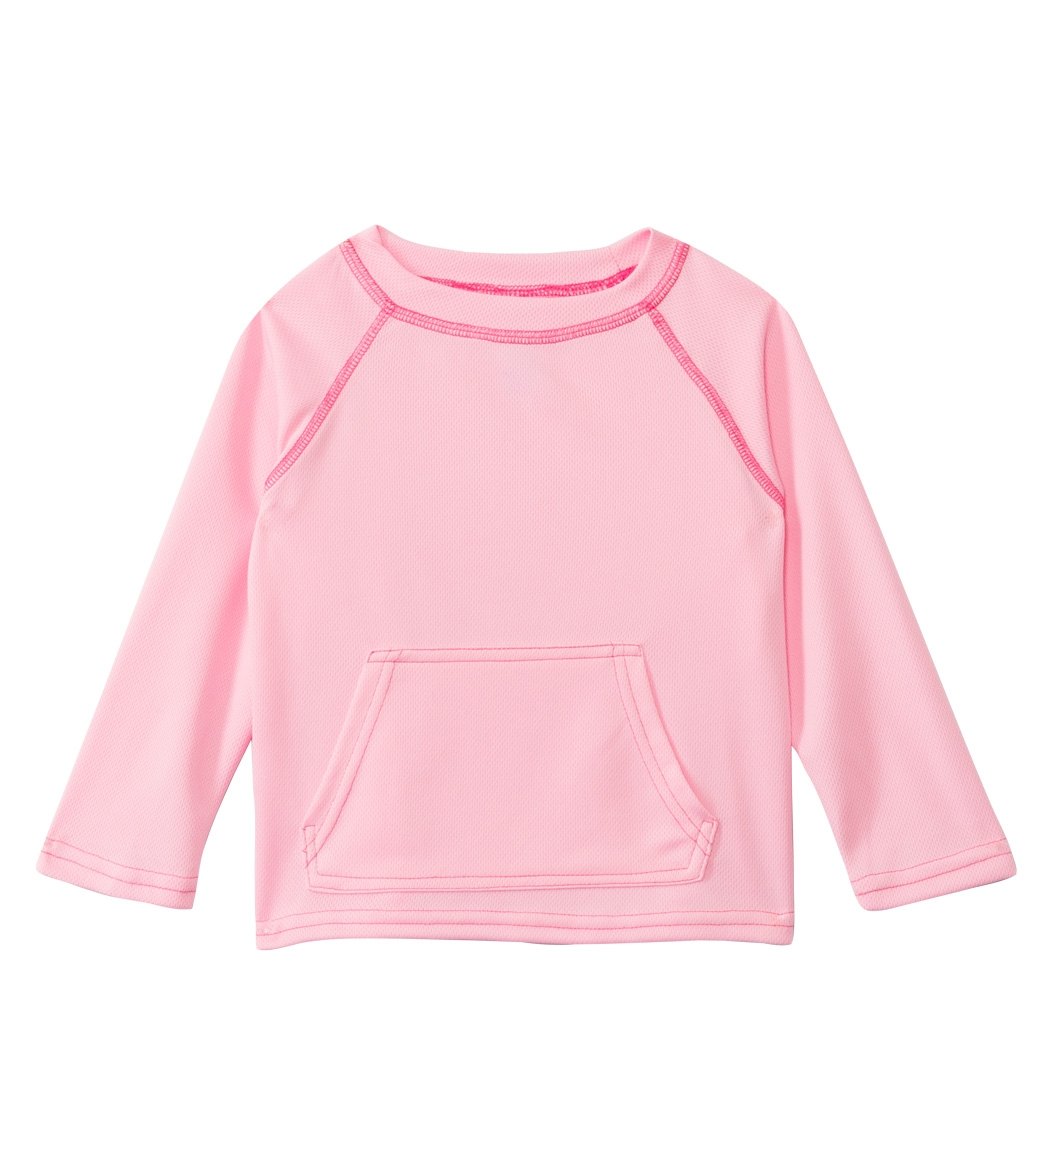 I Play. By Green Sprouts Breatheasy Sun Protection Shirt Baby - Light Pink S/M 6-12Mo Size Small/Medium - Swimoutlet.com